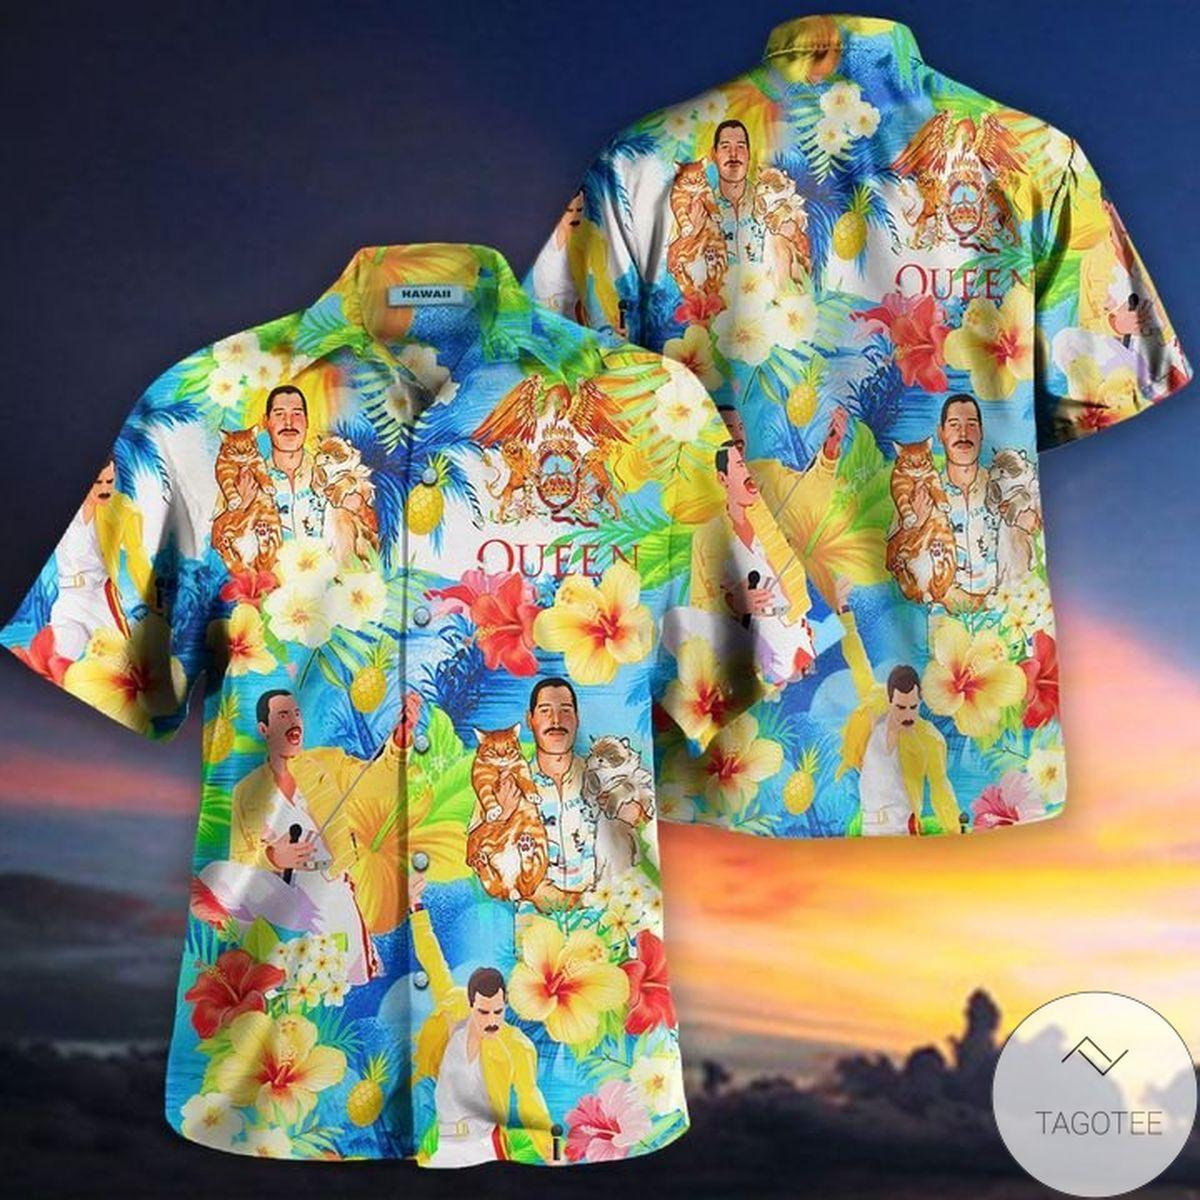 Queen Rock Band Vintage Style Hawaiian Shirt Best Gift For Fans